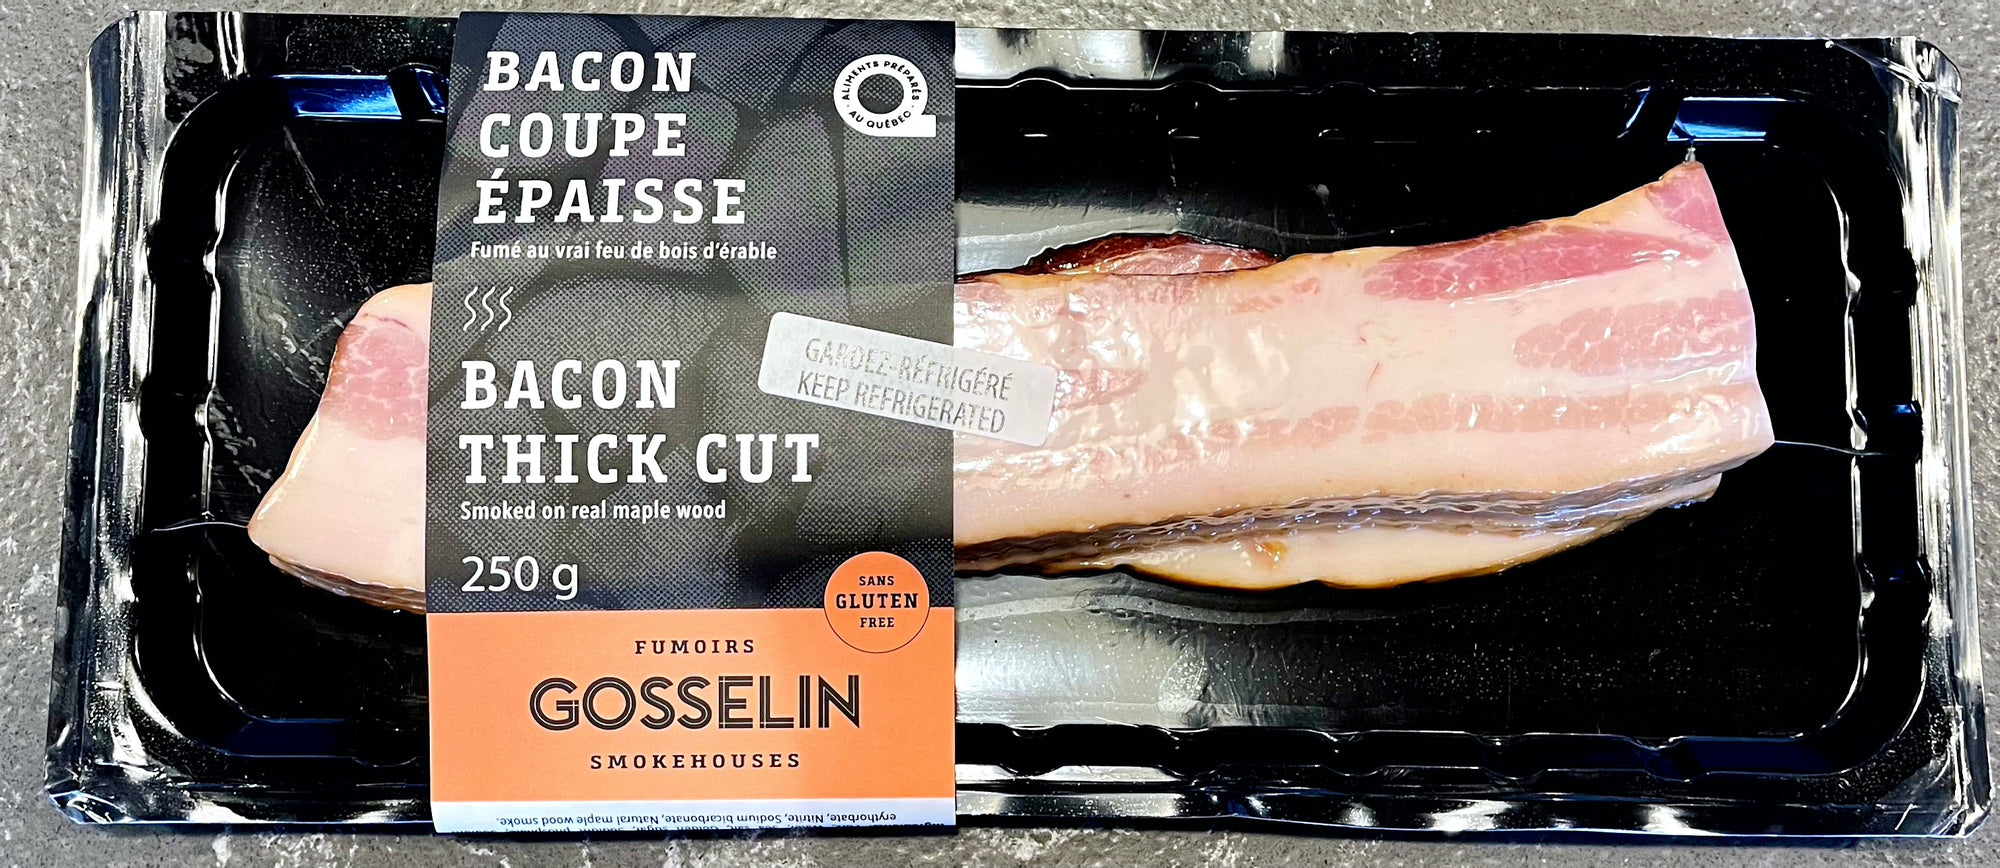 Thick Cut Bacon Smoked on Real Maplewood by Fumoirs Gosselin 250g (Frozen)